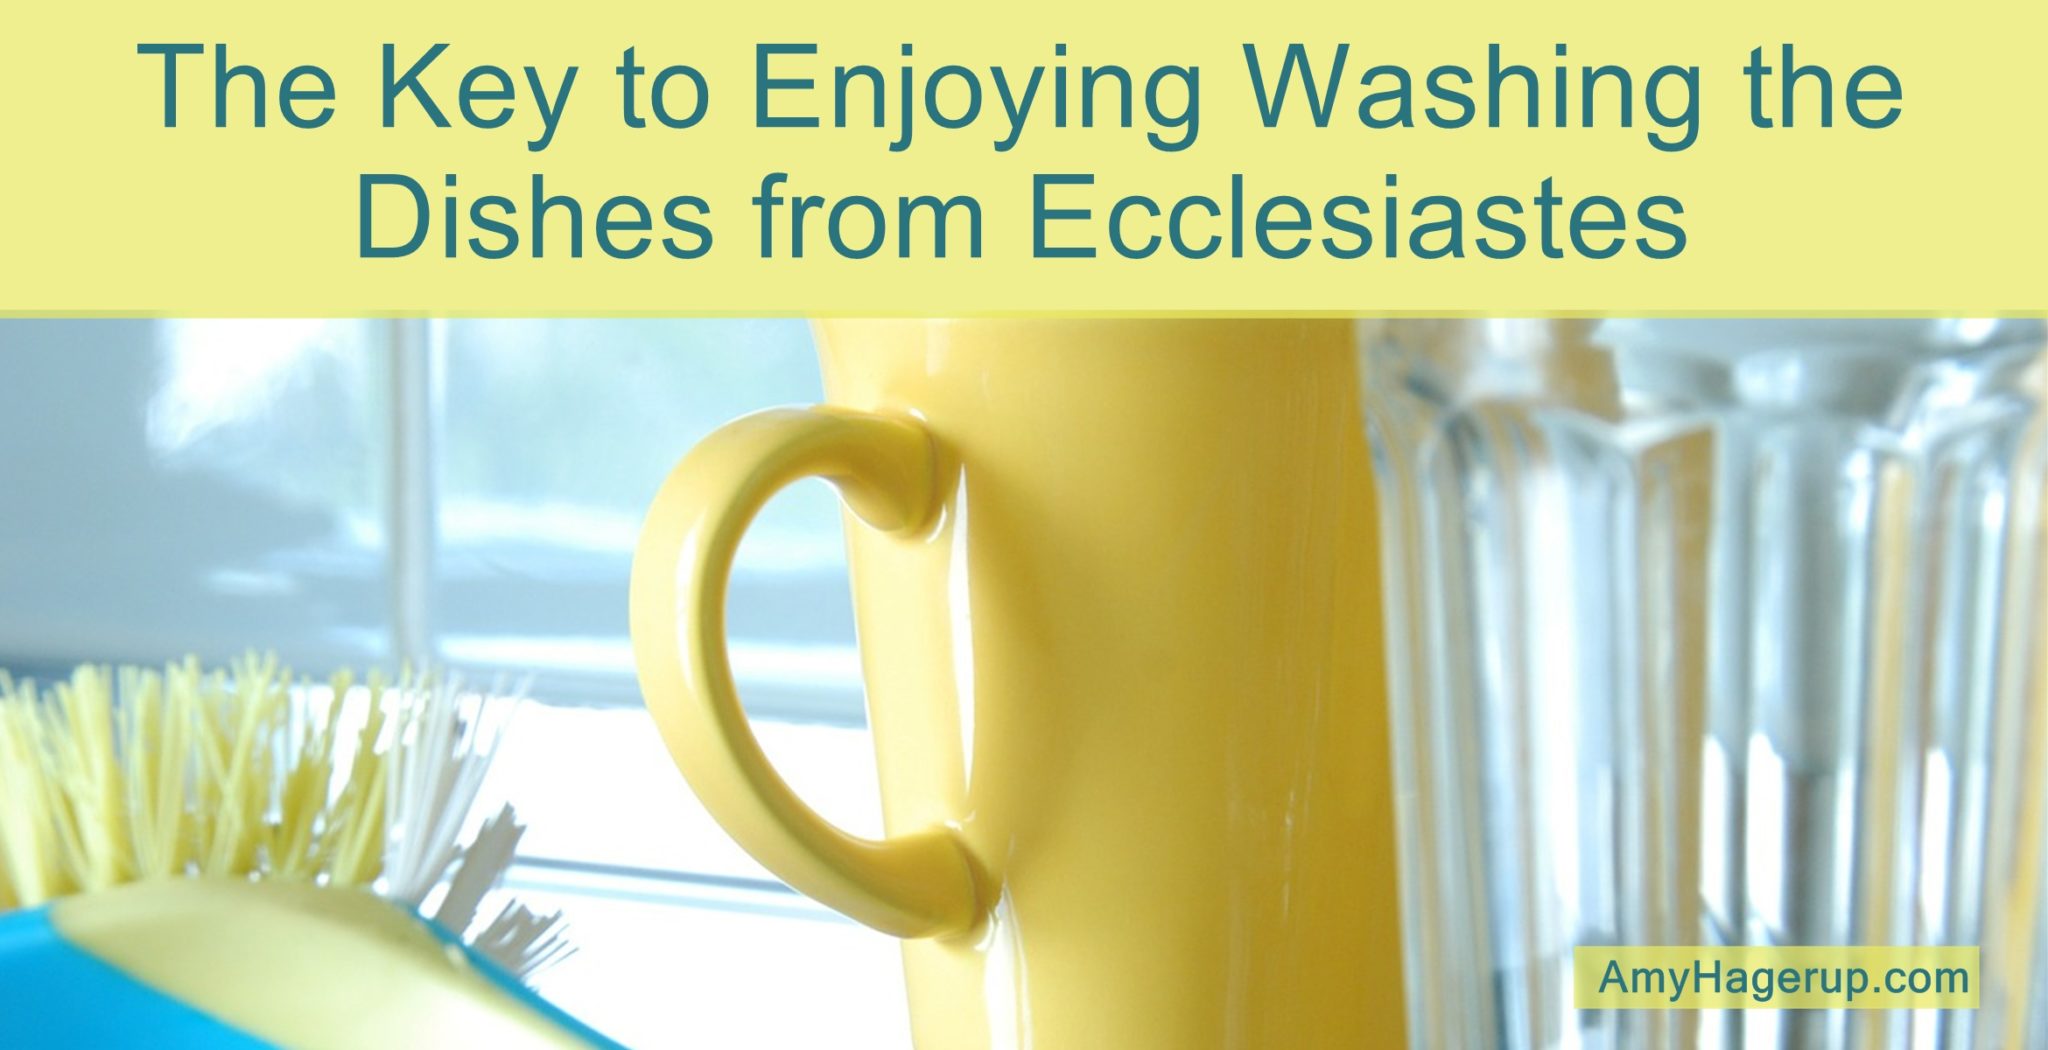 Here is an interesting perspective on enjoying washing the dishes as learned from Ecclesiastes.